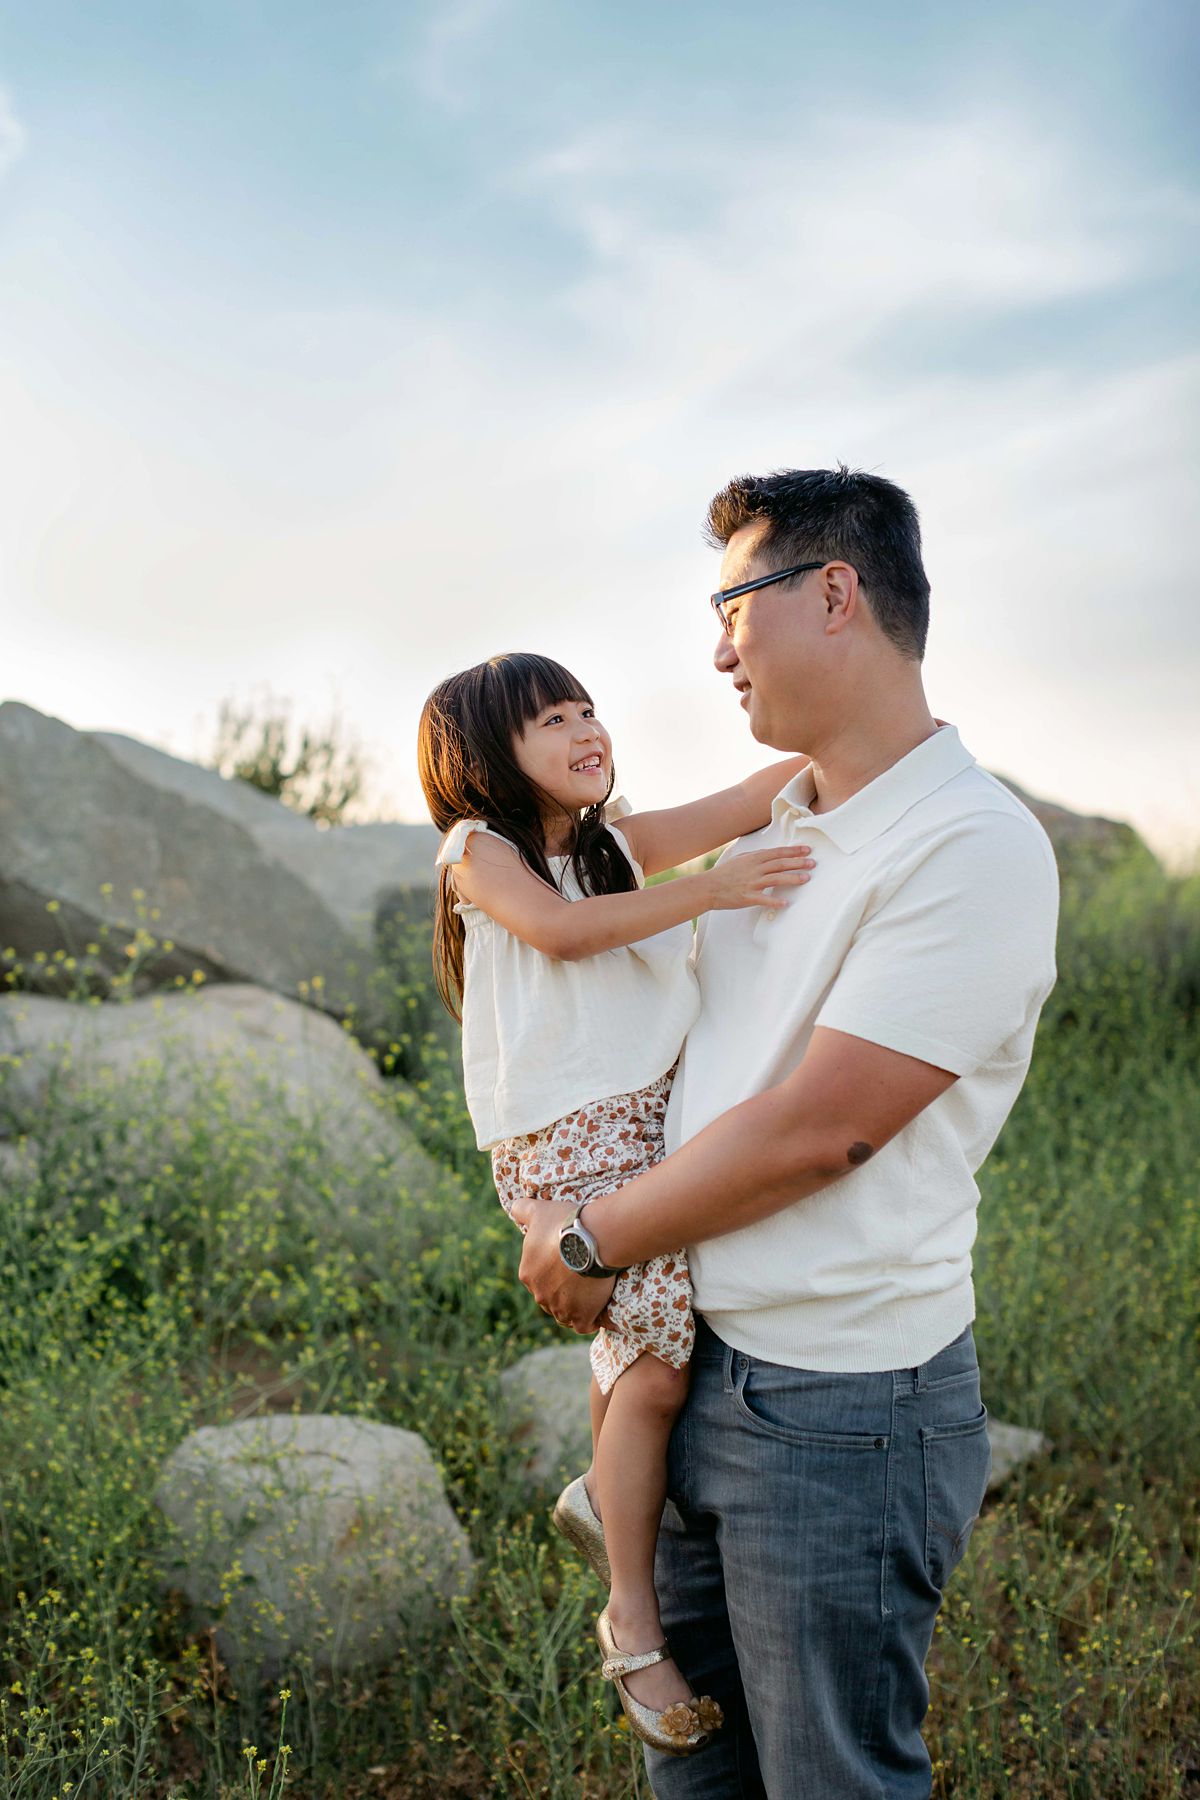 Dad and daughter looking at each other smiling. Boulder and tall grass background.